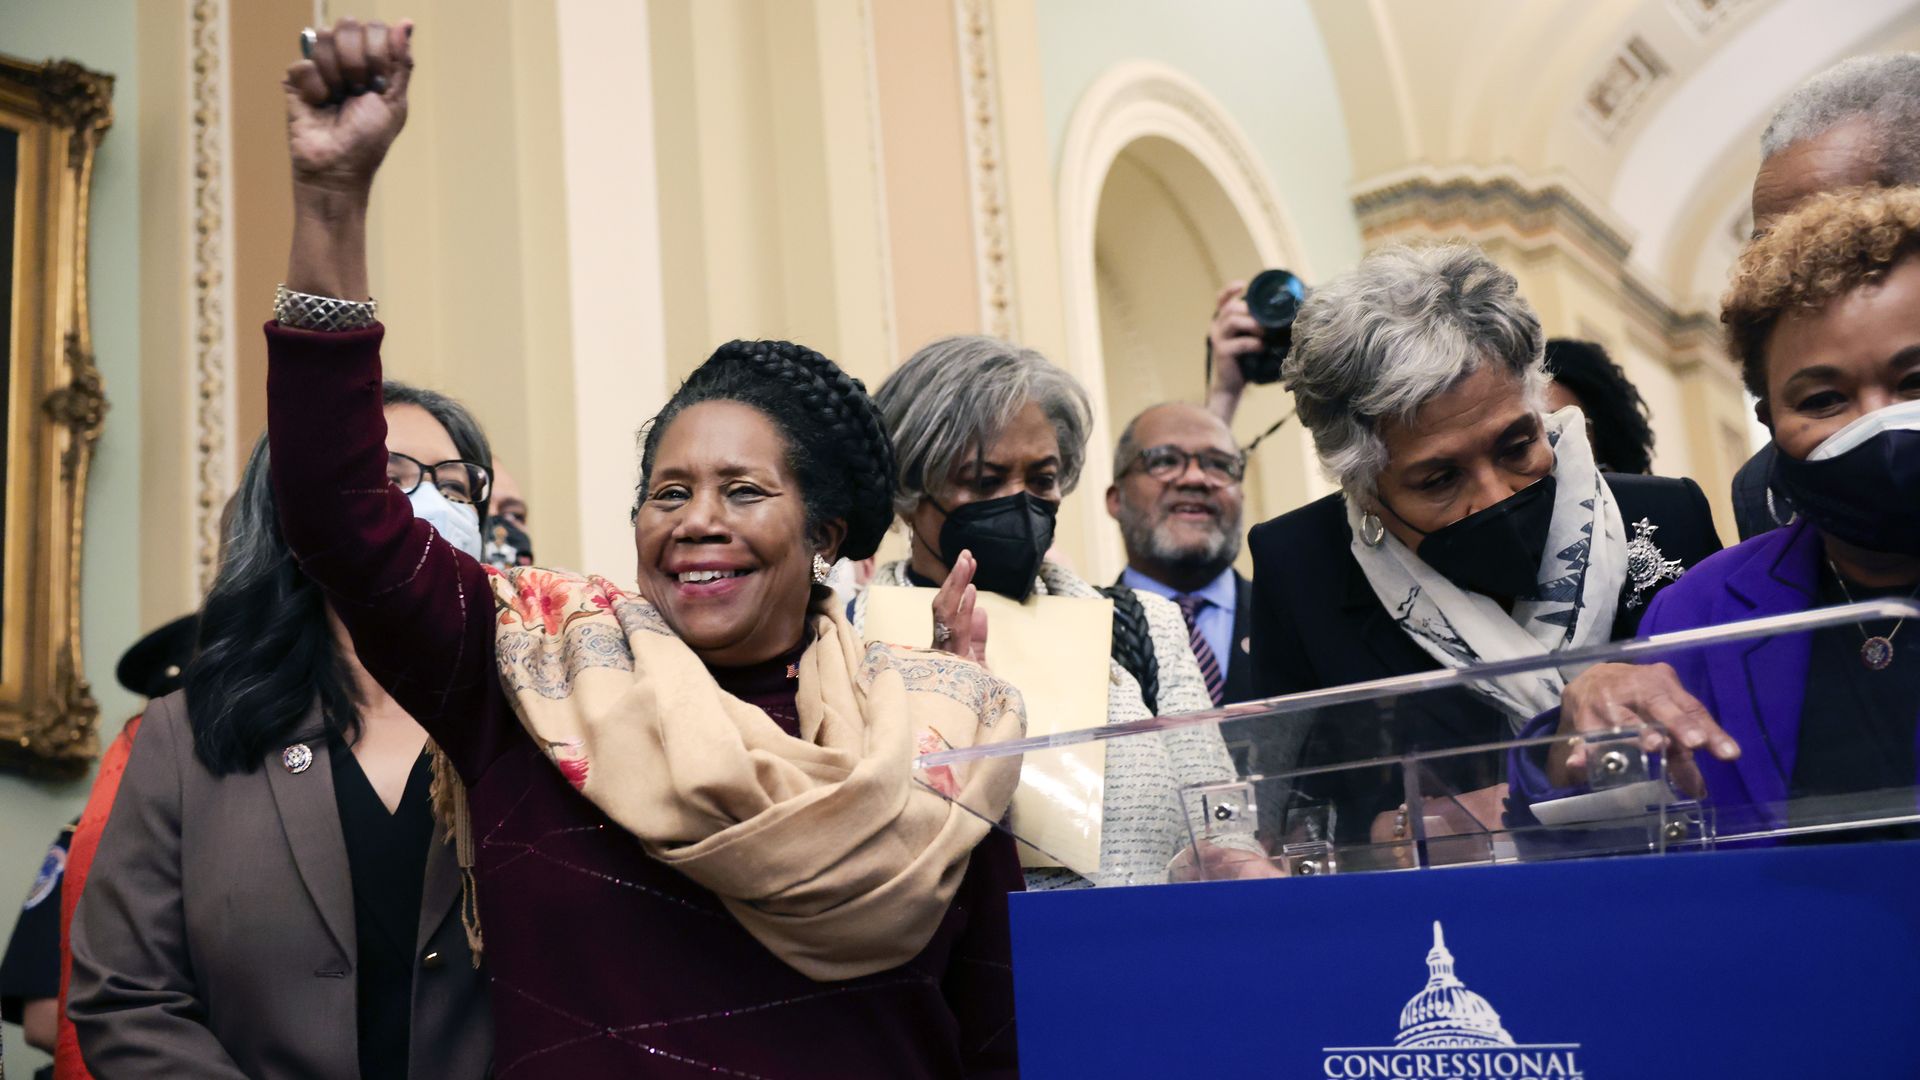 Members of the Congressional Black Caucus are seen celebrating Ketanji Brown Jackson's confirmation to the Supreme Court.